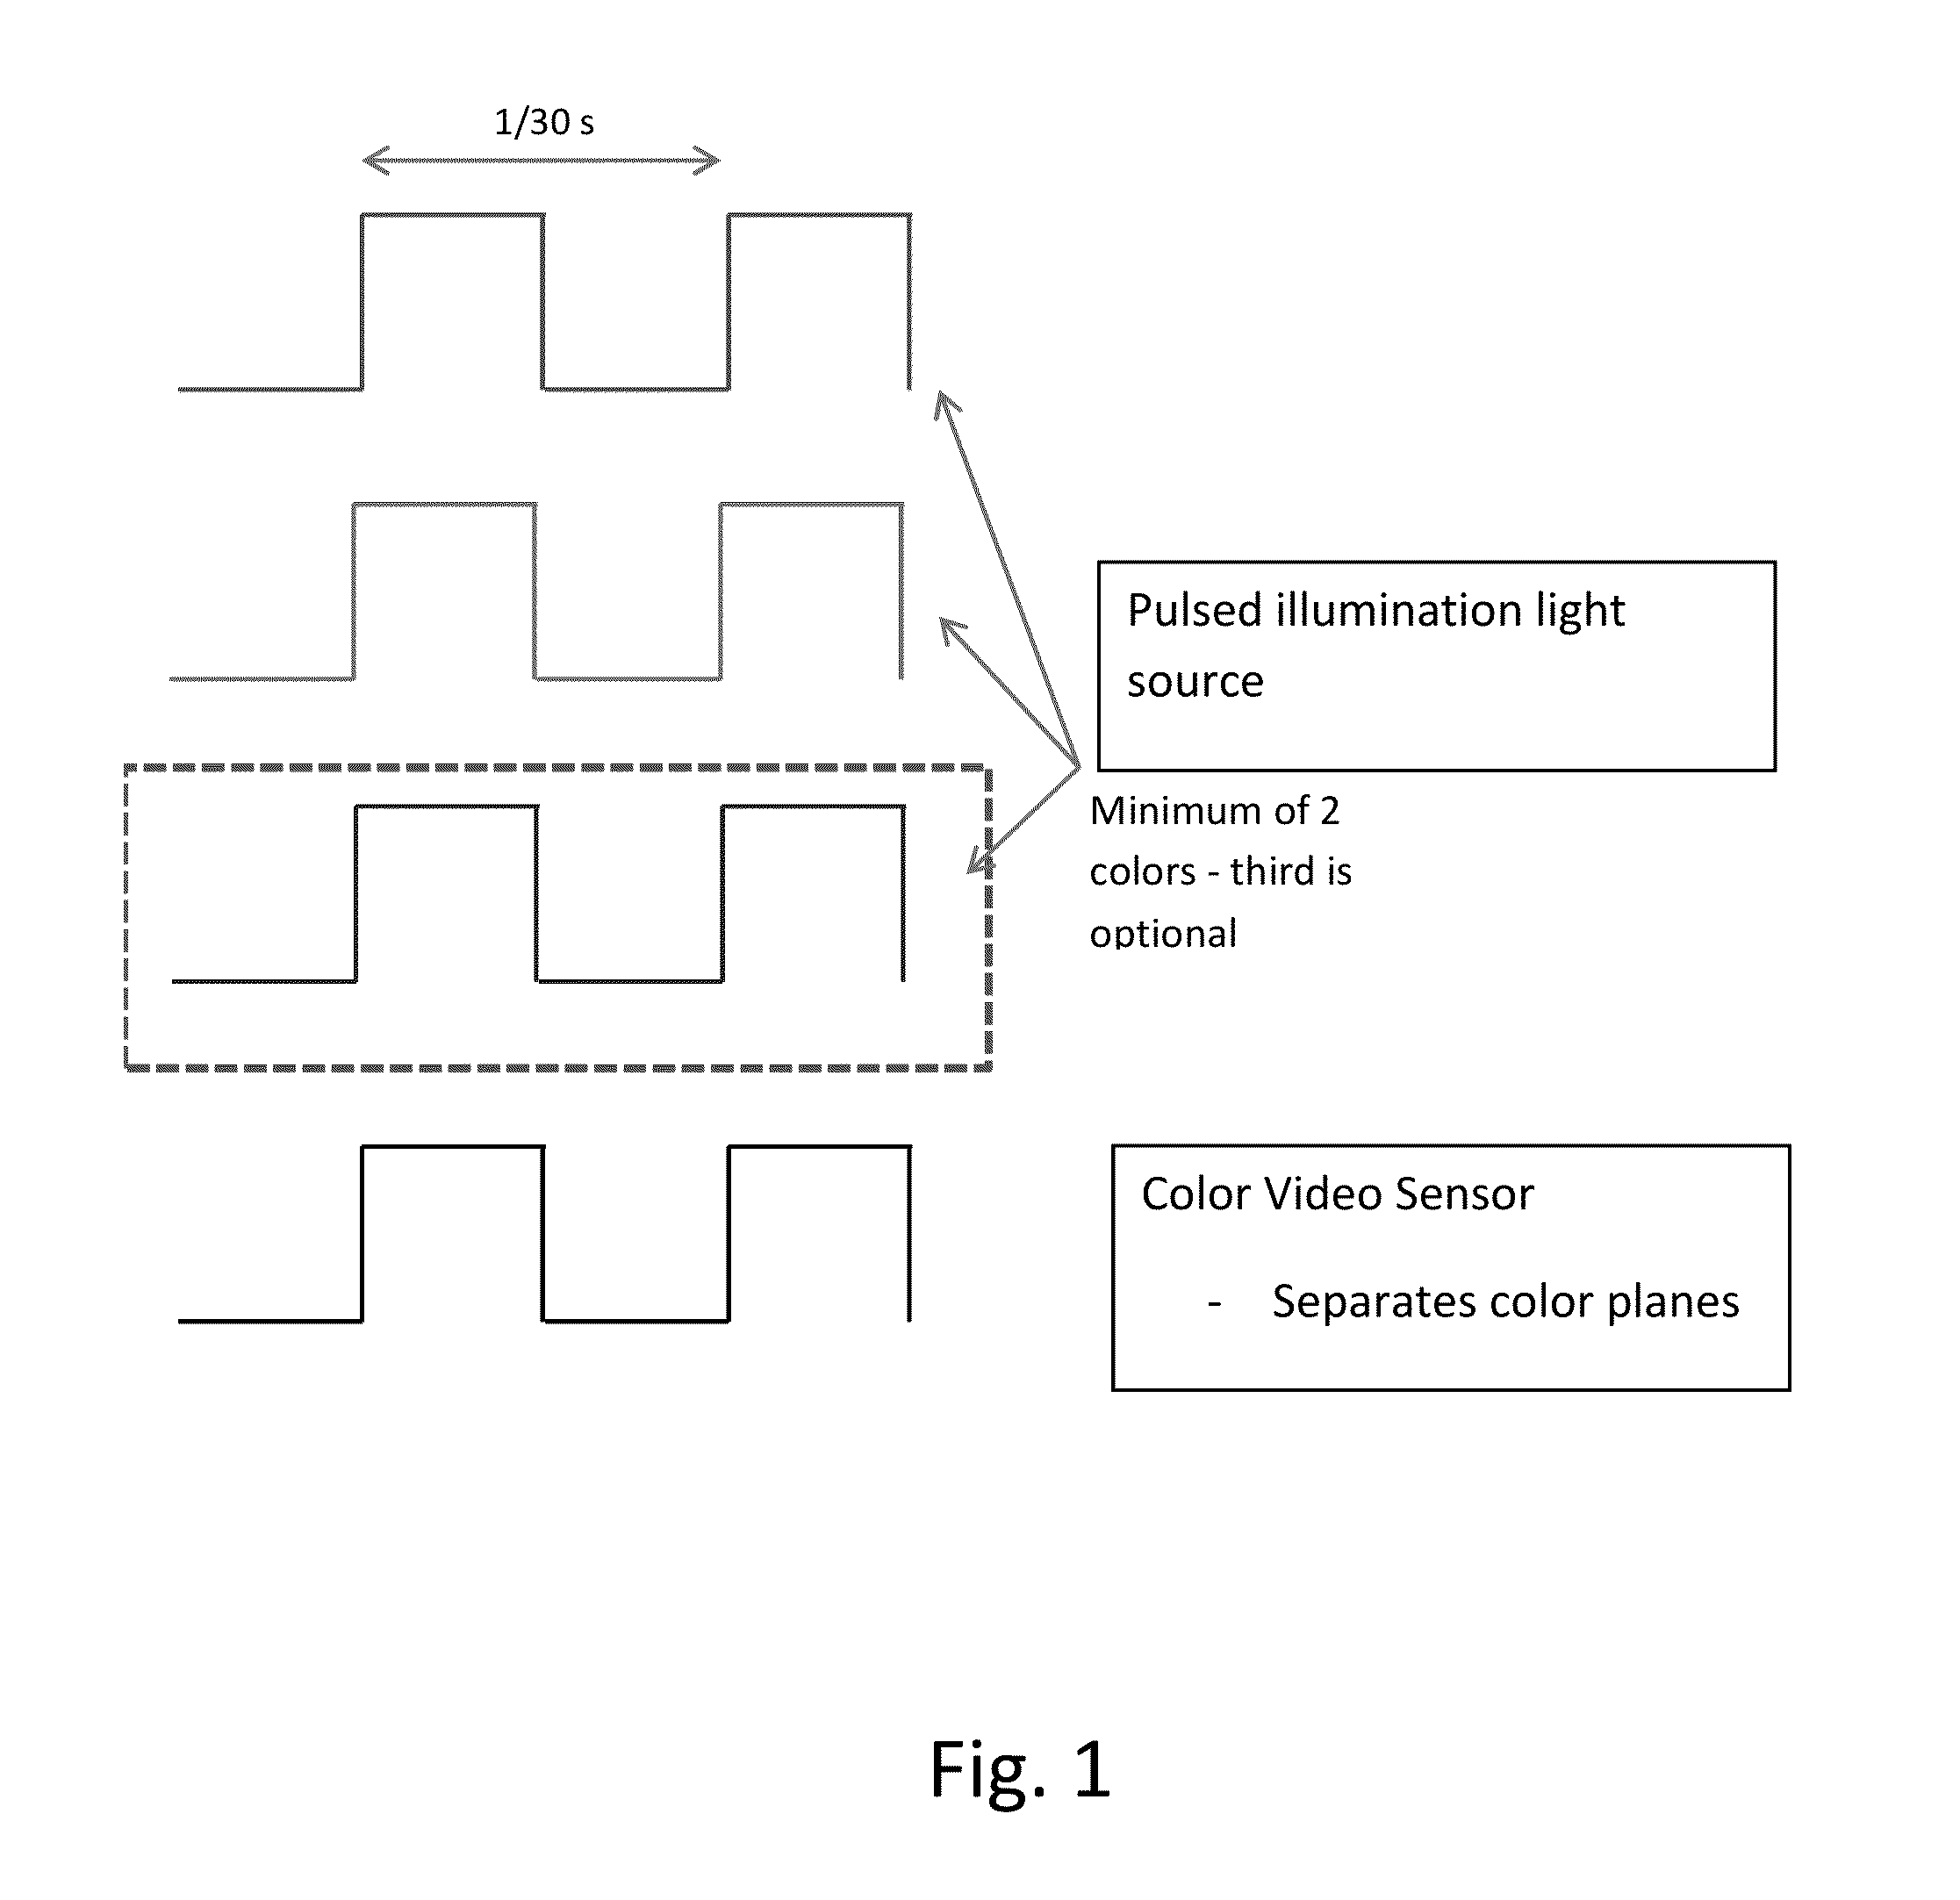 Coordinated illumination and image signal capture for enhanced signal detection